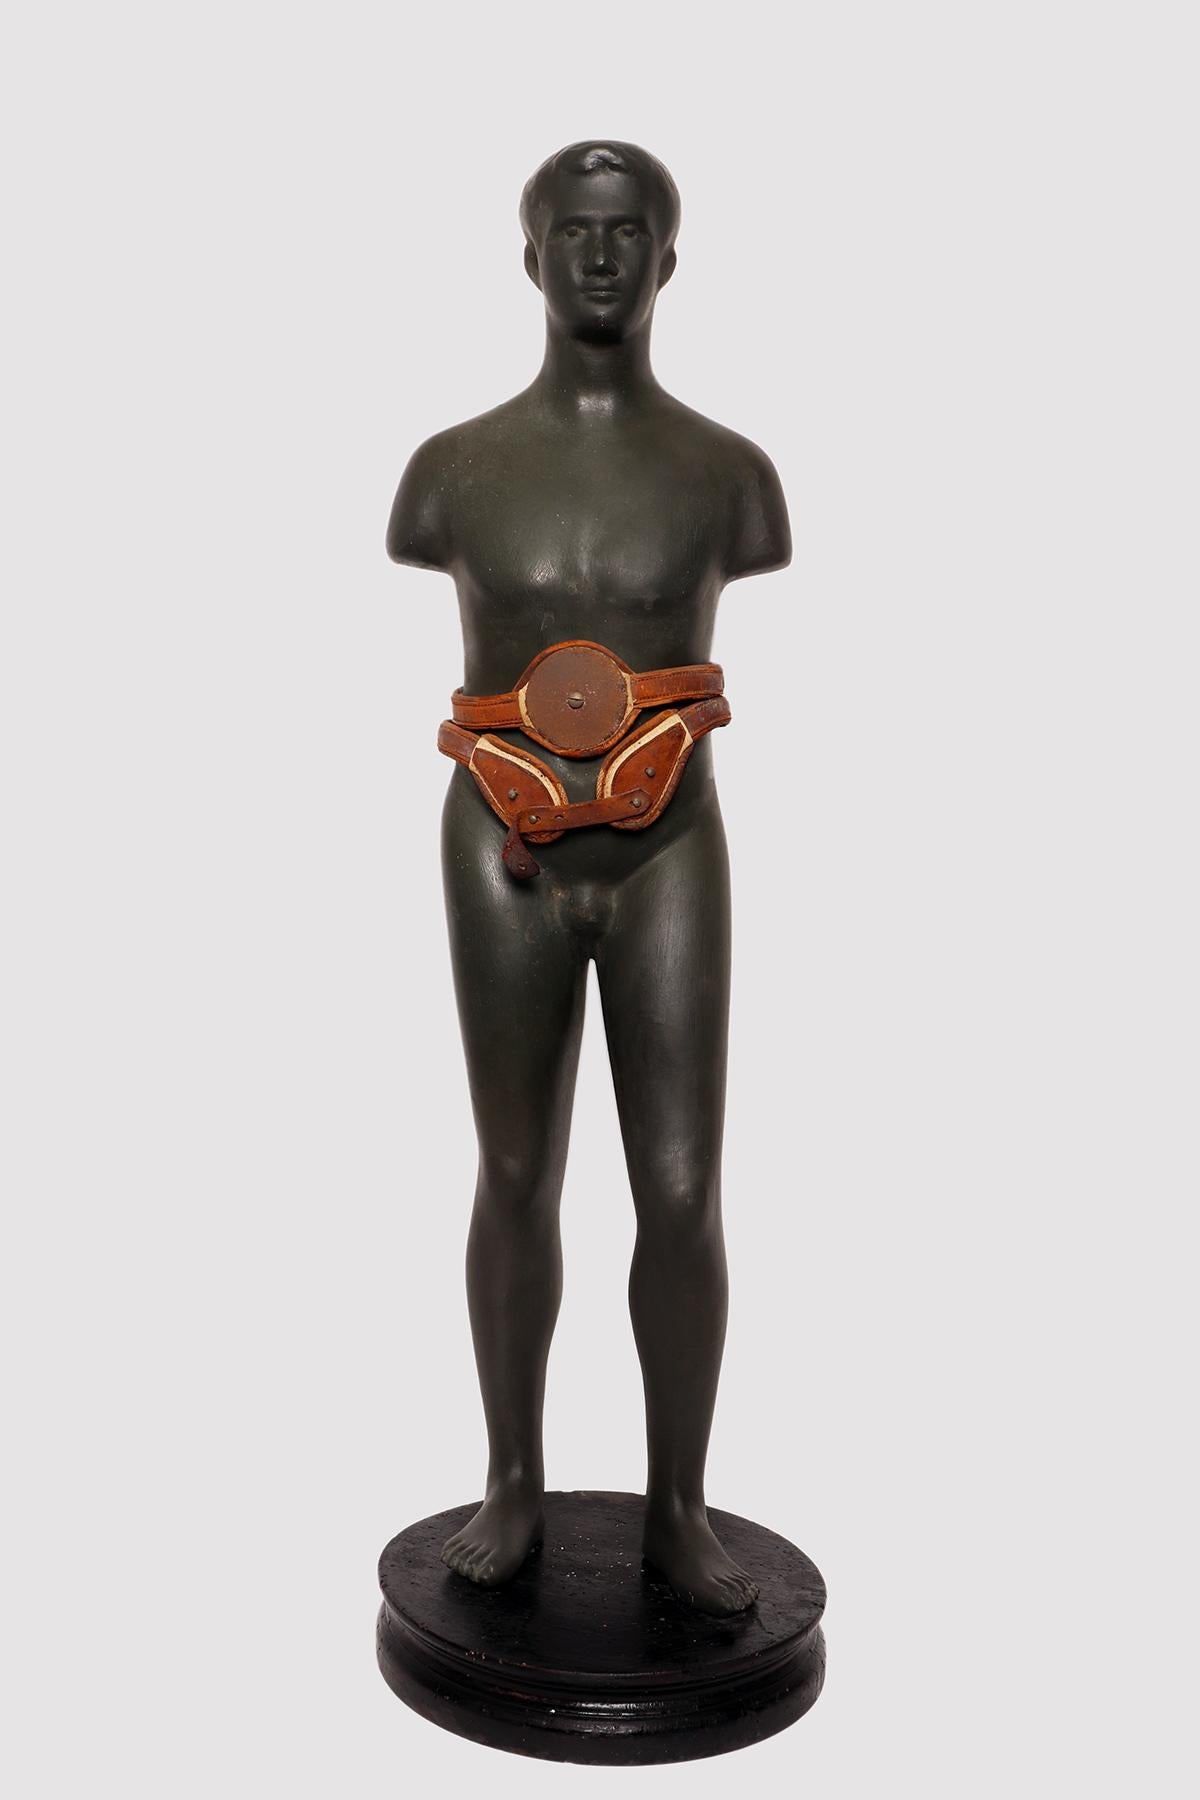 Pair of advertising mannequins for elastic and containment belts.
The base is made of fruitwood. The mannequins, rarely found still together, are made of finished papier-mâché and in a homogeneous color, indifferently. The mannequins are suitable